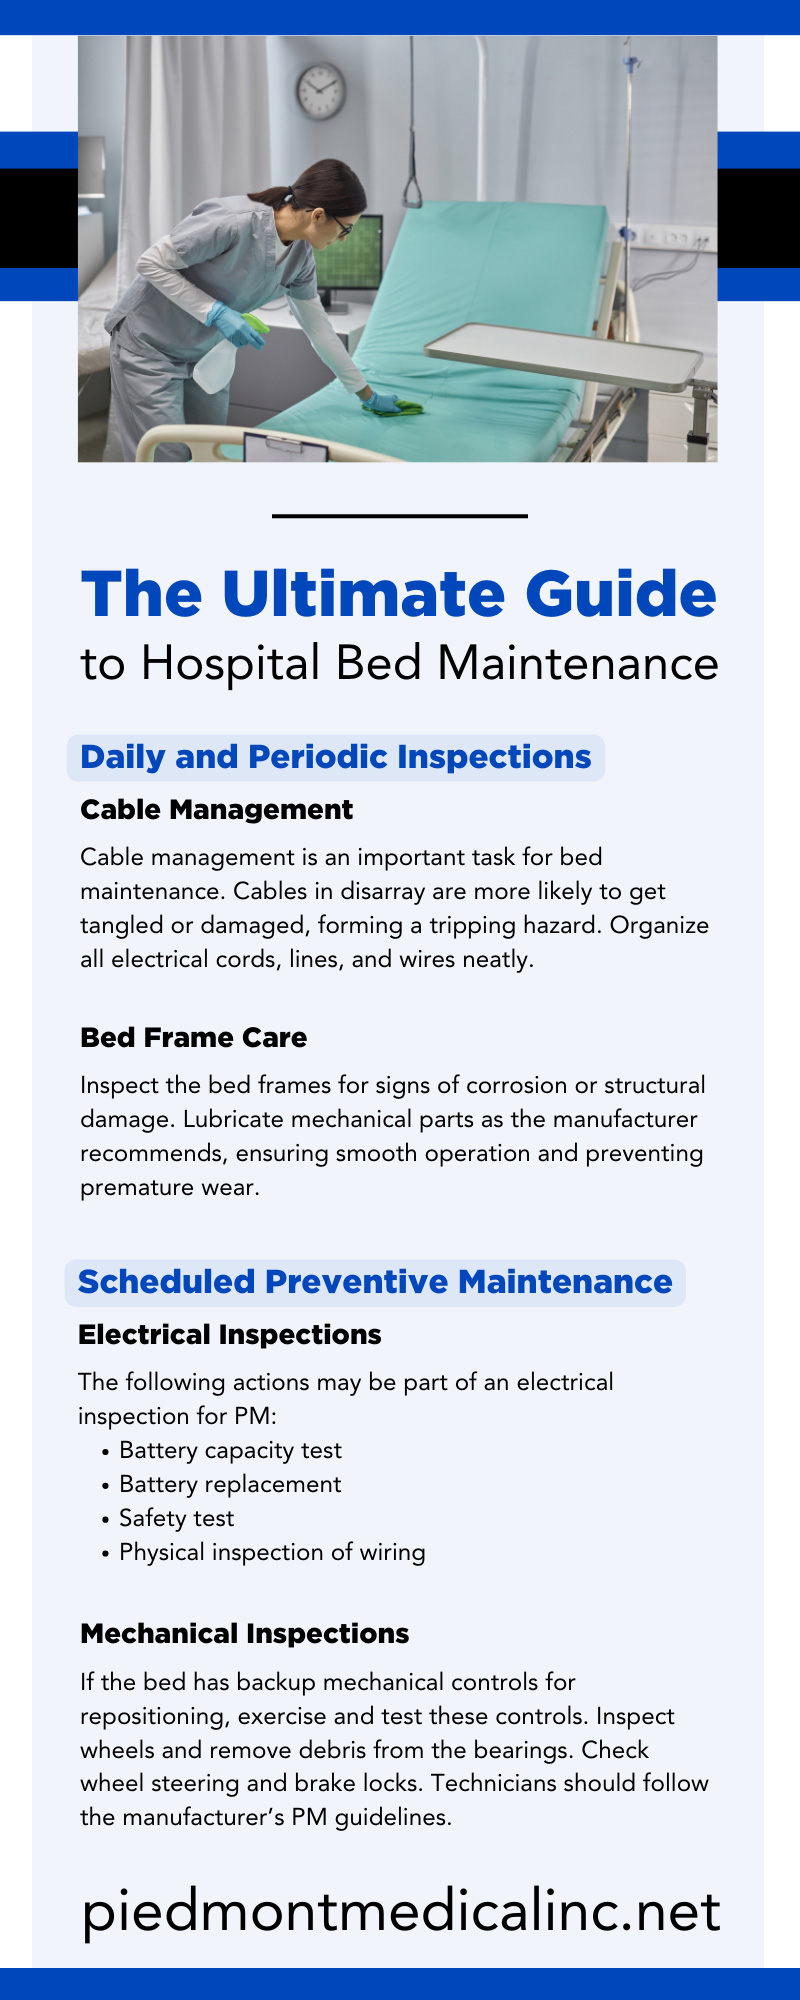 The Ultimate Guide to Hospital Bed Maintenance